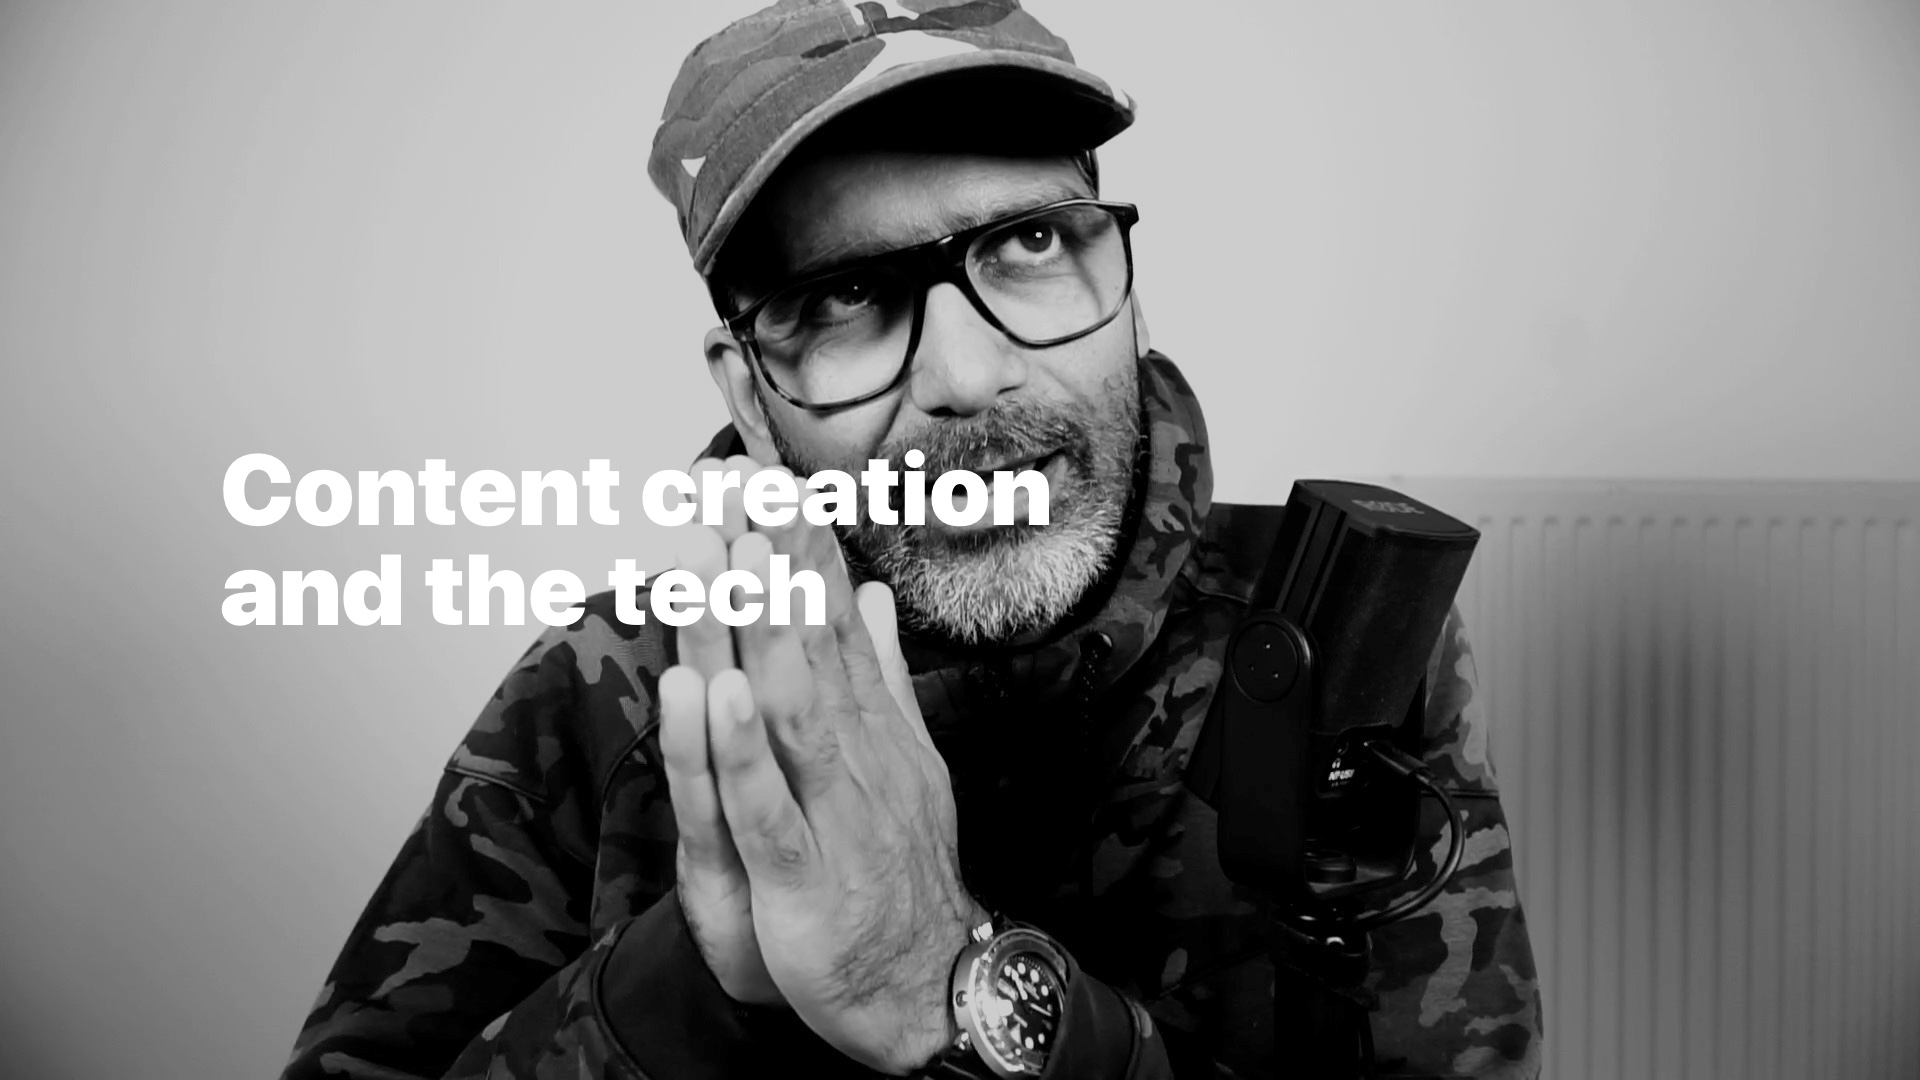 Content creation and the tech